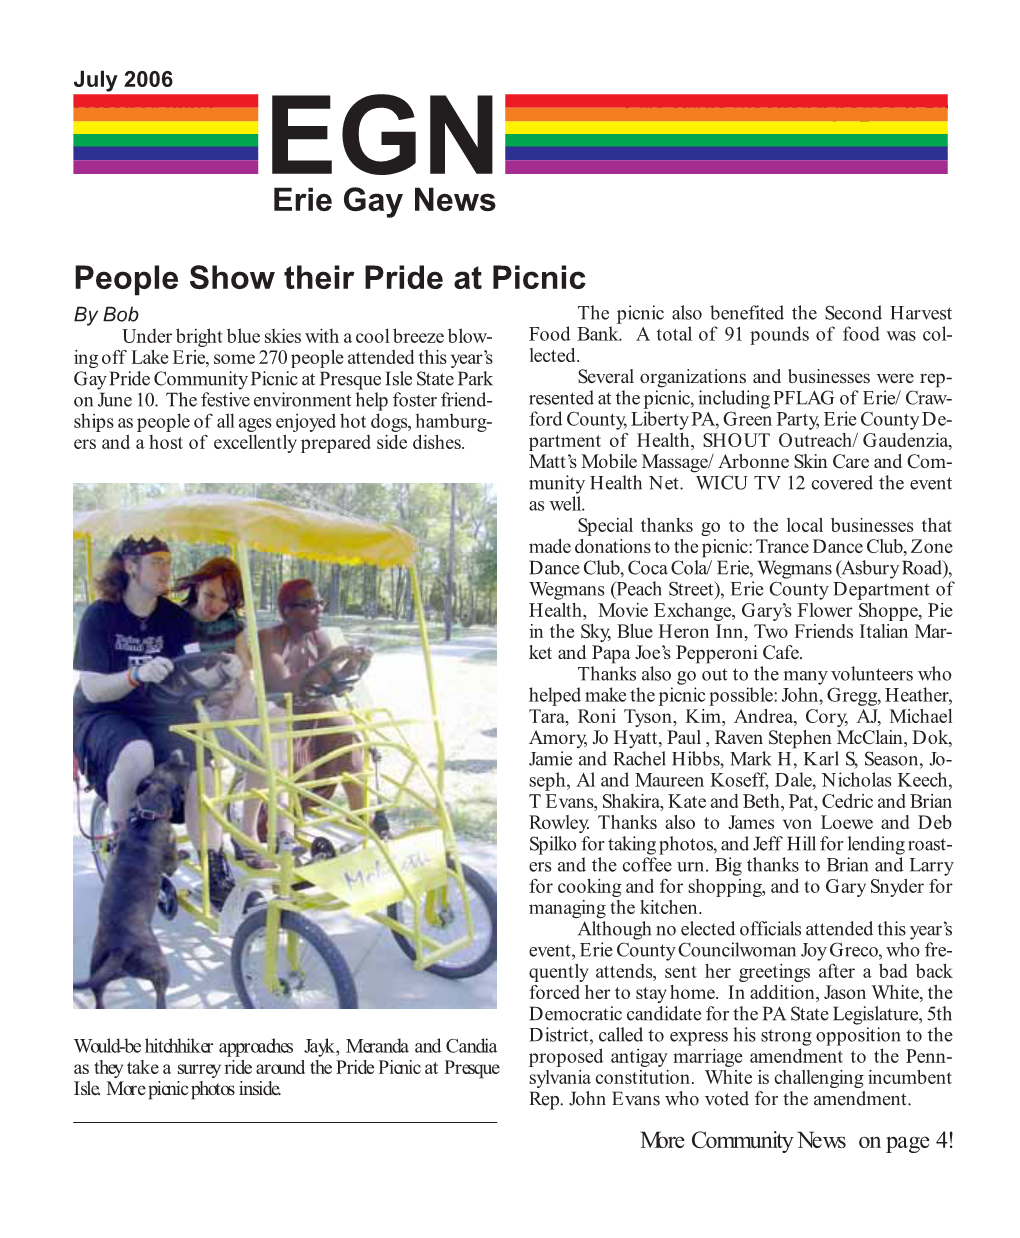 Erie Gay News People Show Their Pride at Picnic